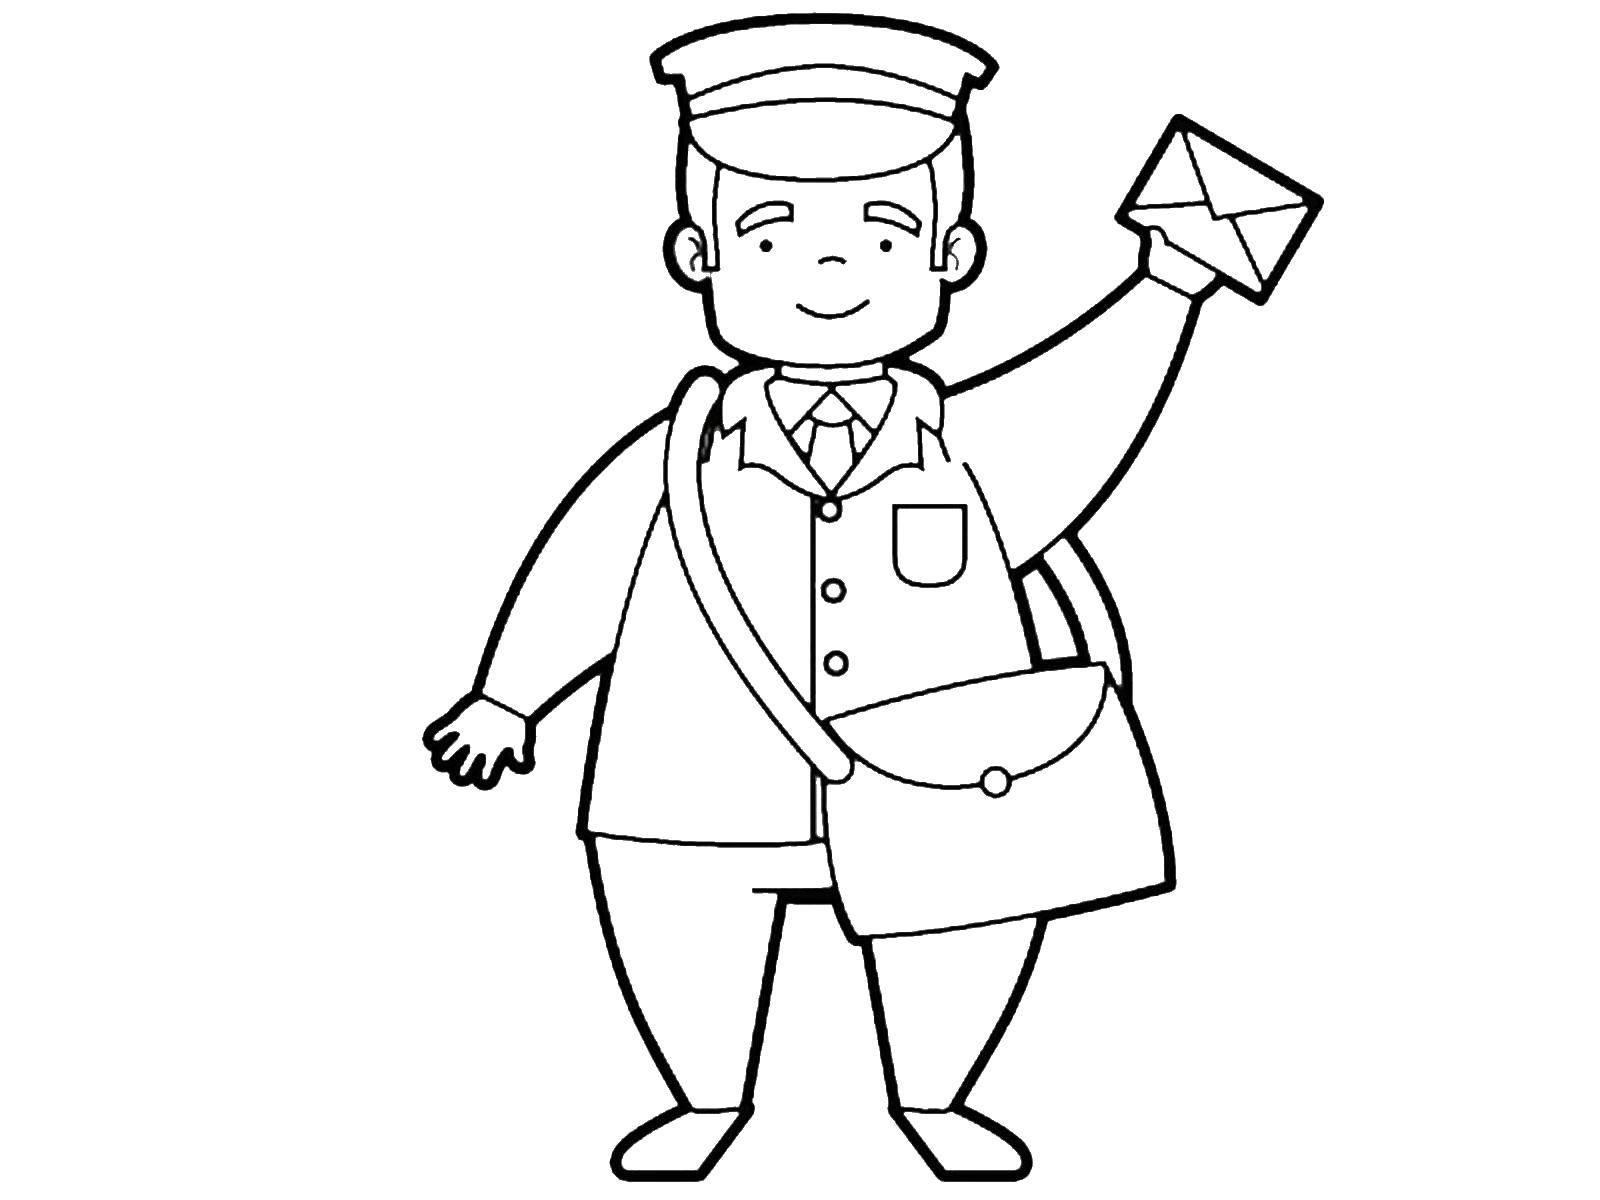 Coloring The postman. Category a profession. Tags:  profession, postman, mail.